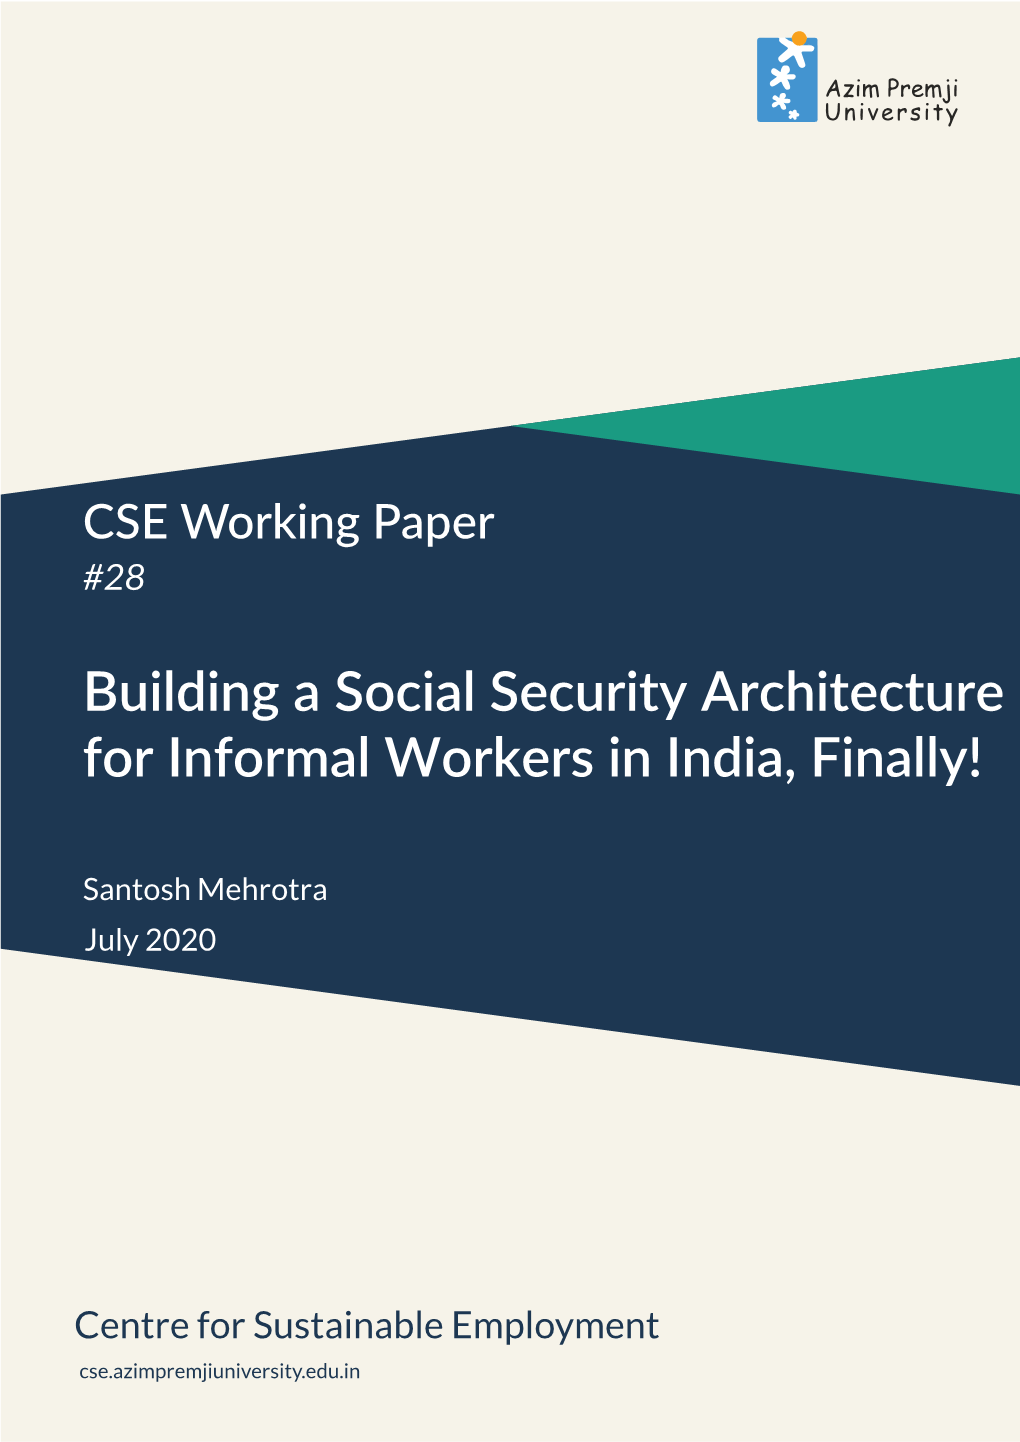 Building a Social Security Architecture for Informal Workers in India, Finally!